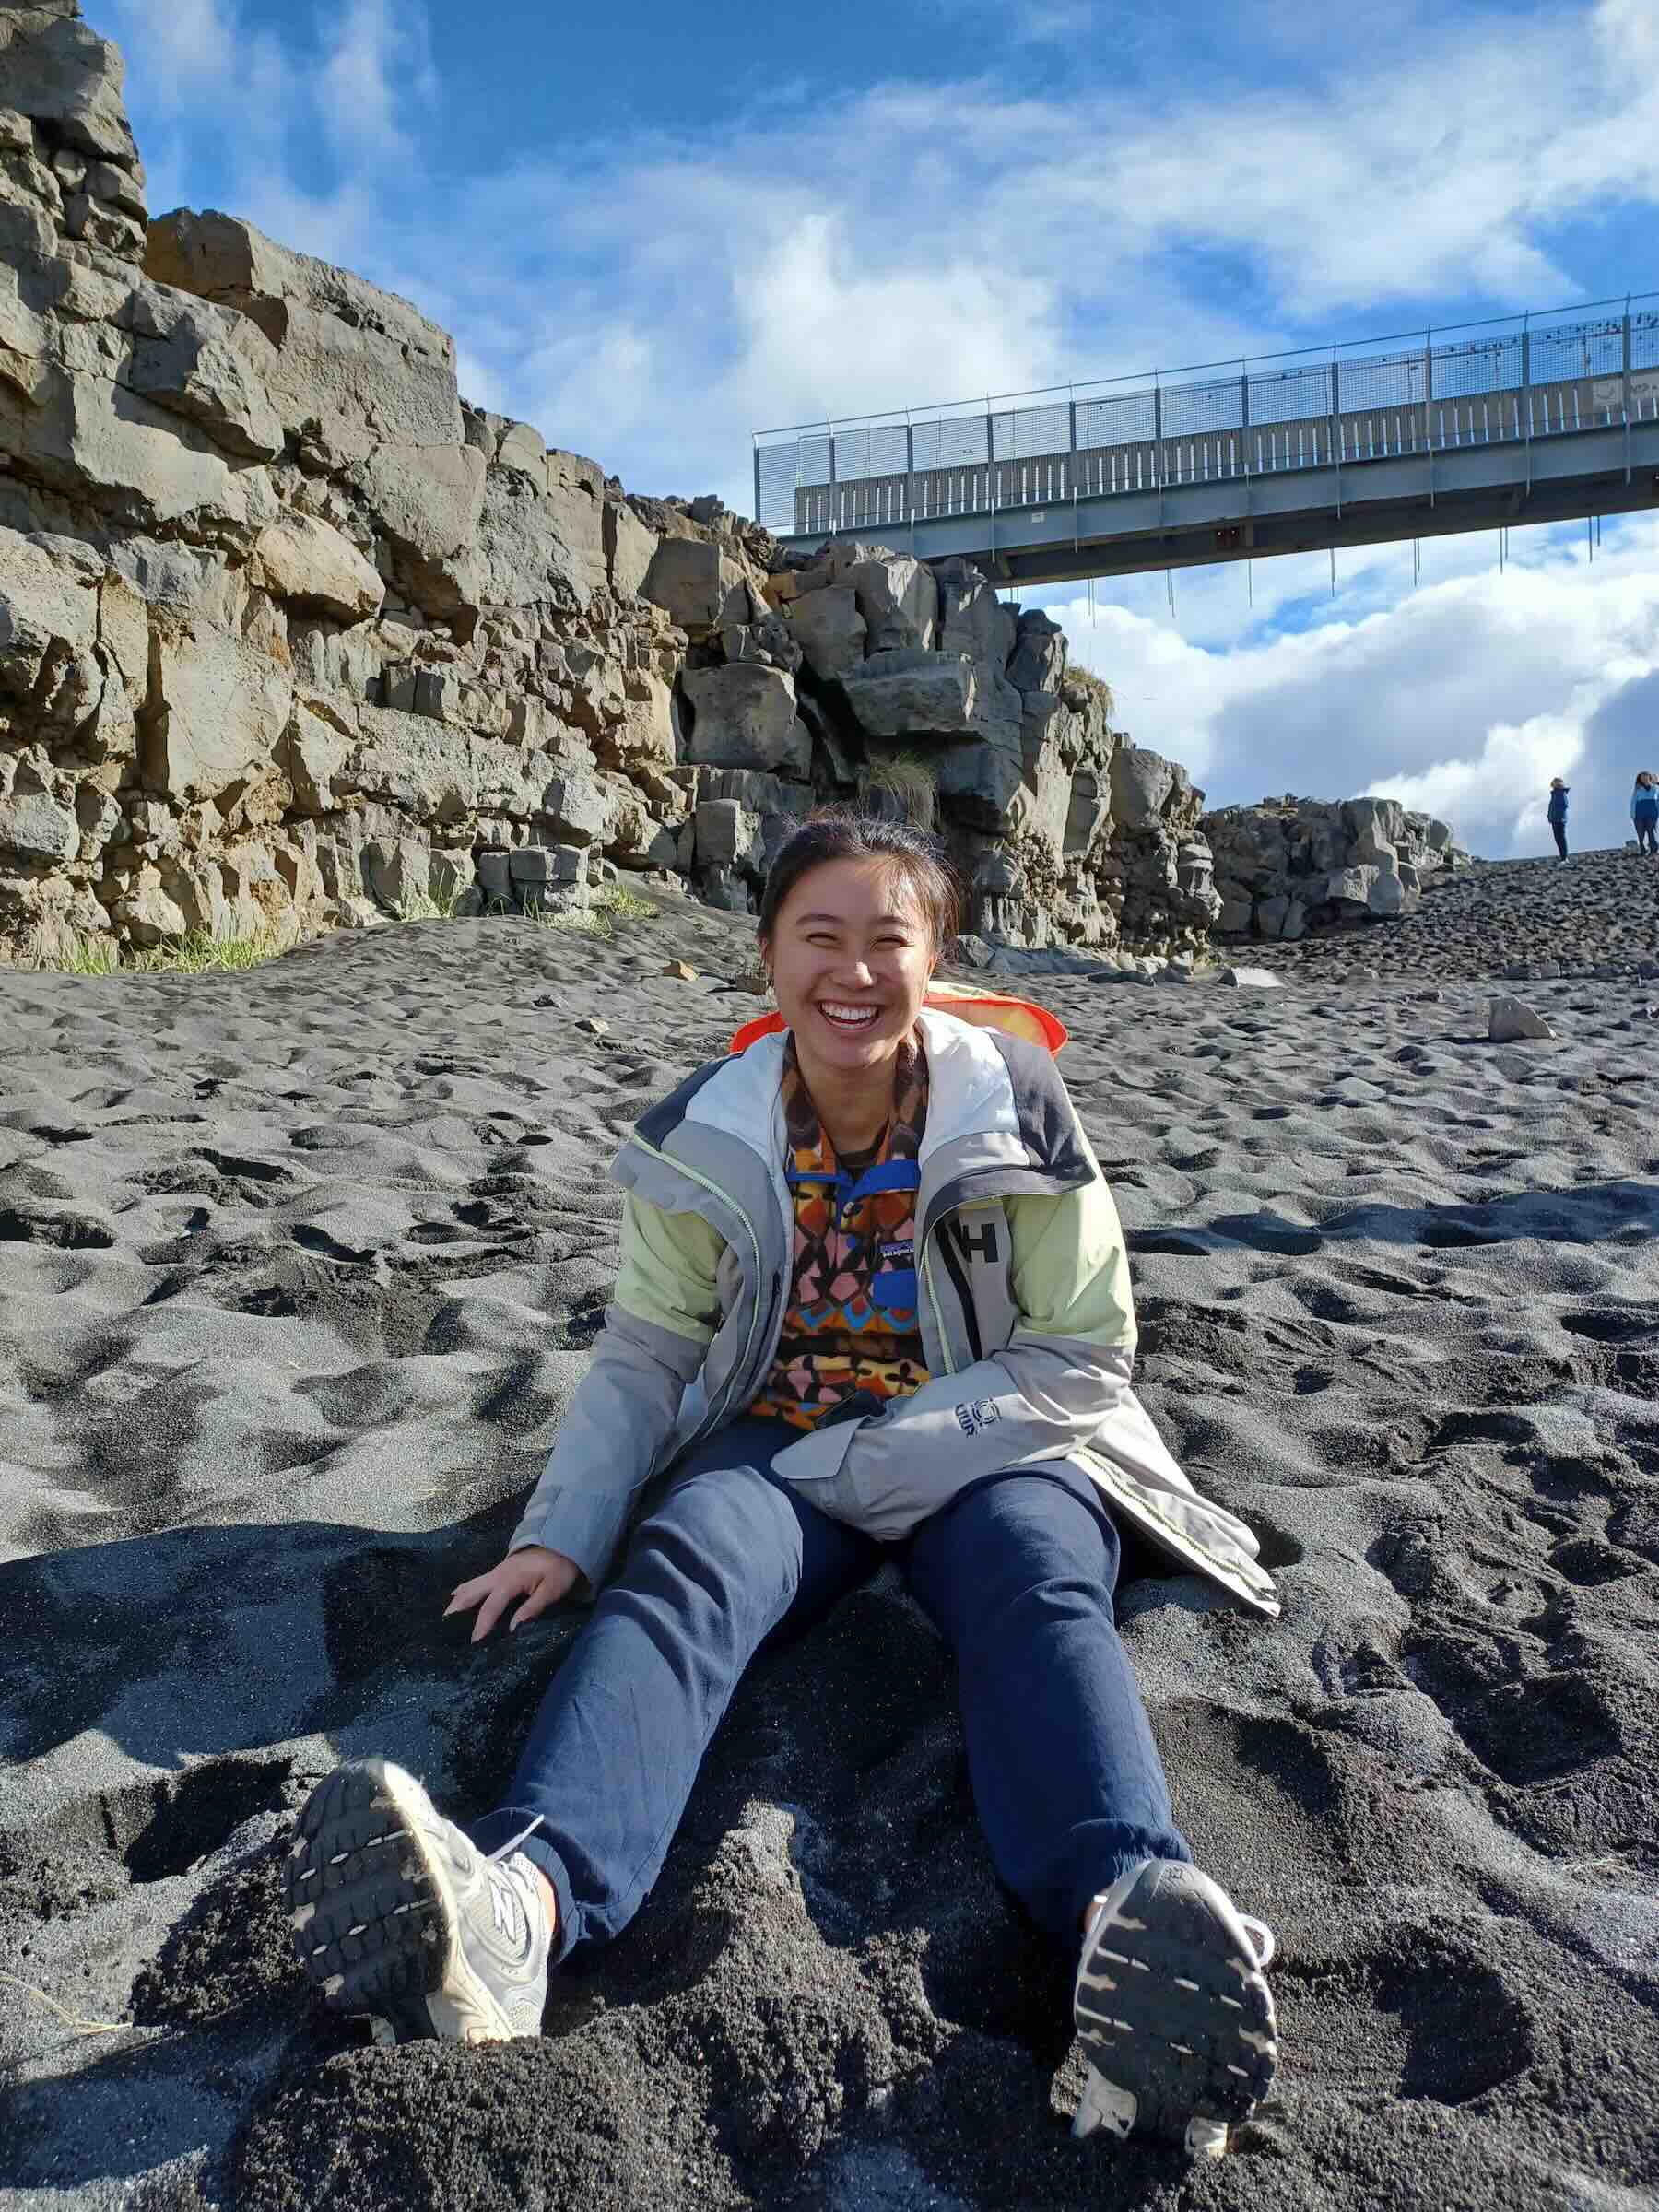 A smiling person sitting in the sand on a beach with a rock cliff and a bridge in the background.